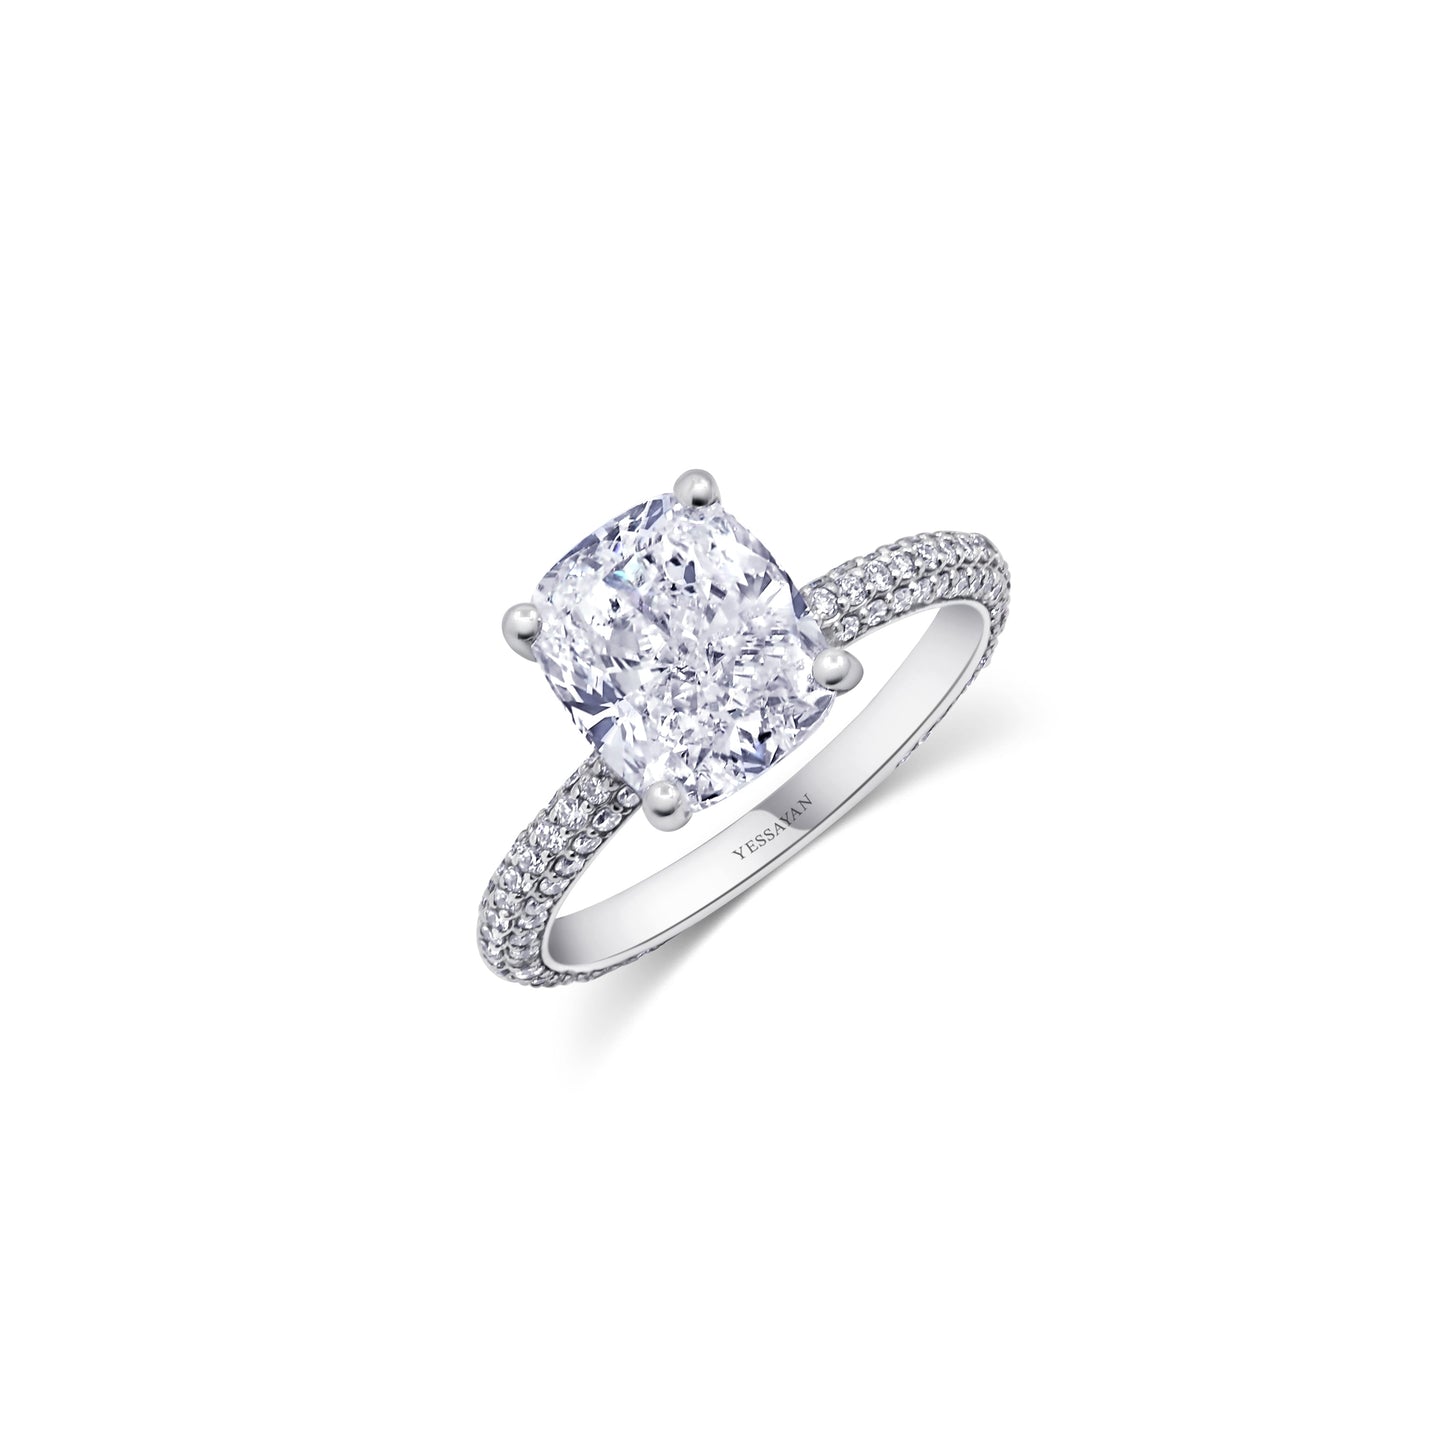 Almasaty 3.00 Carats Certified Cushion Cut Solitaire Diamond Ring